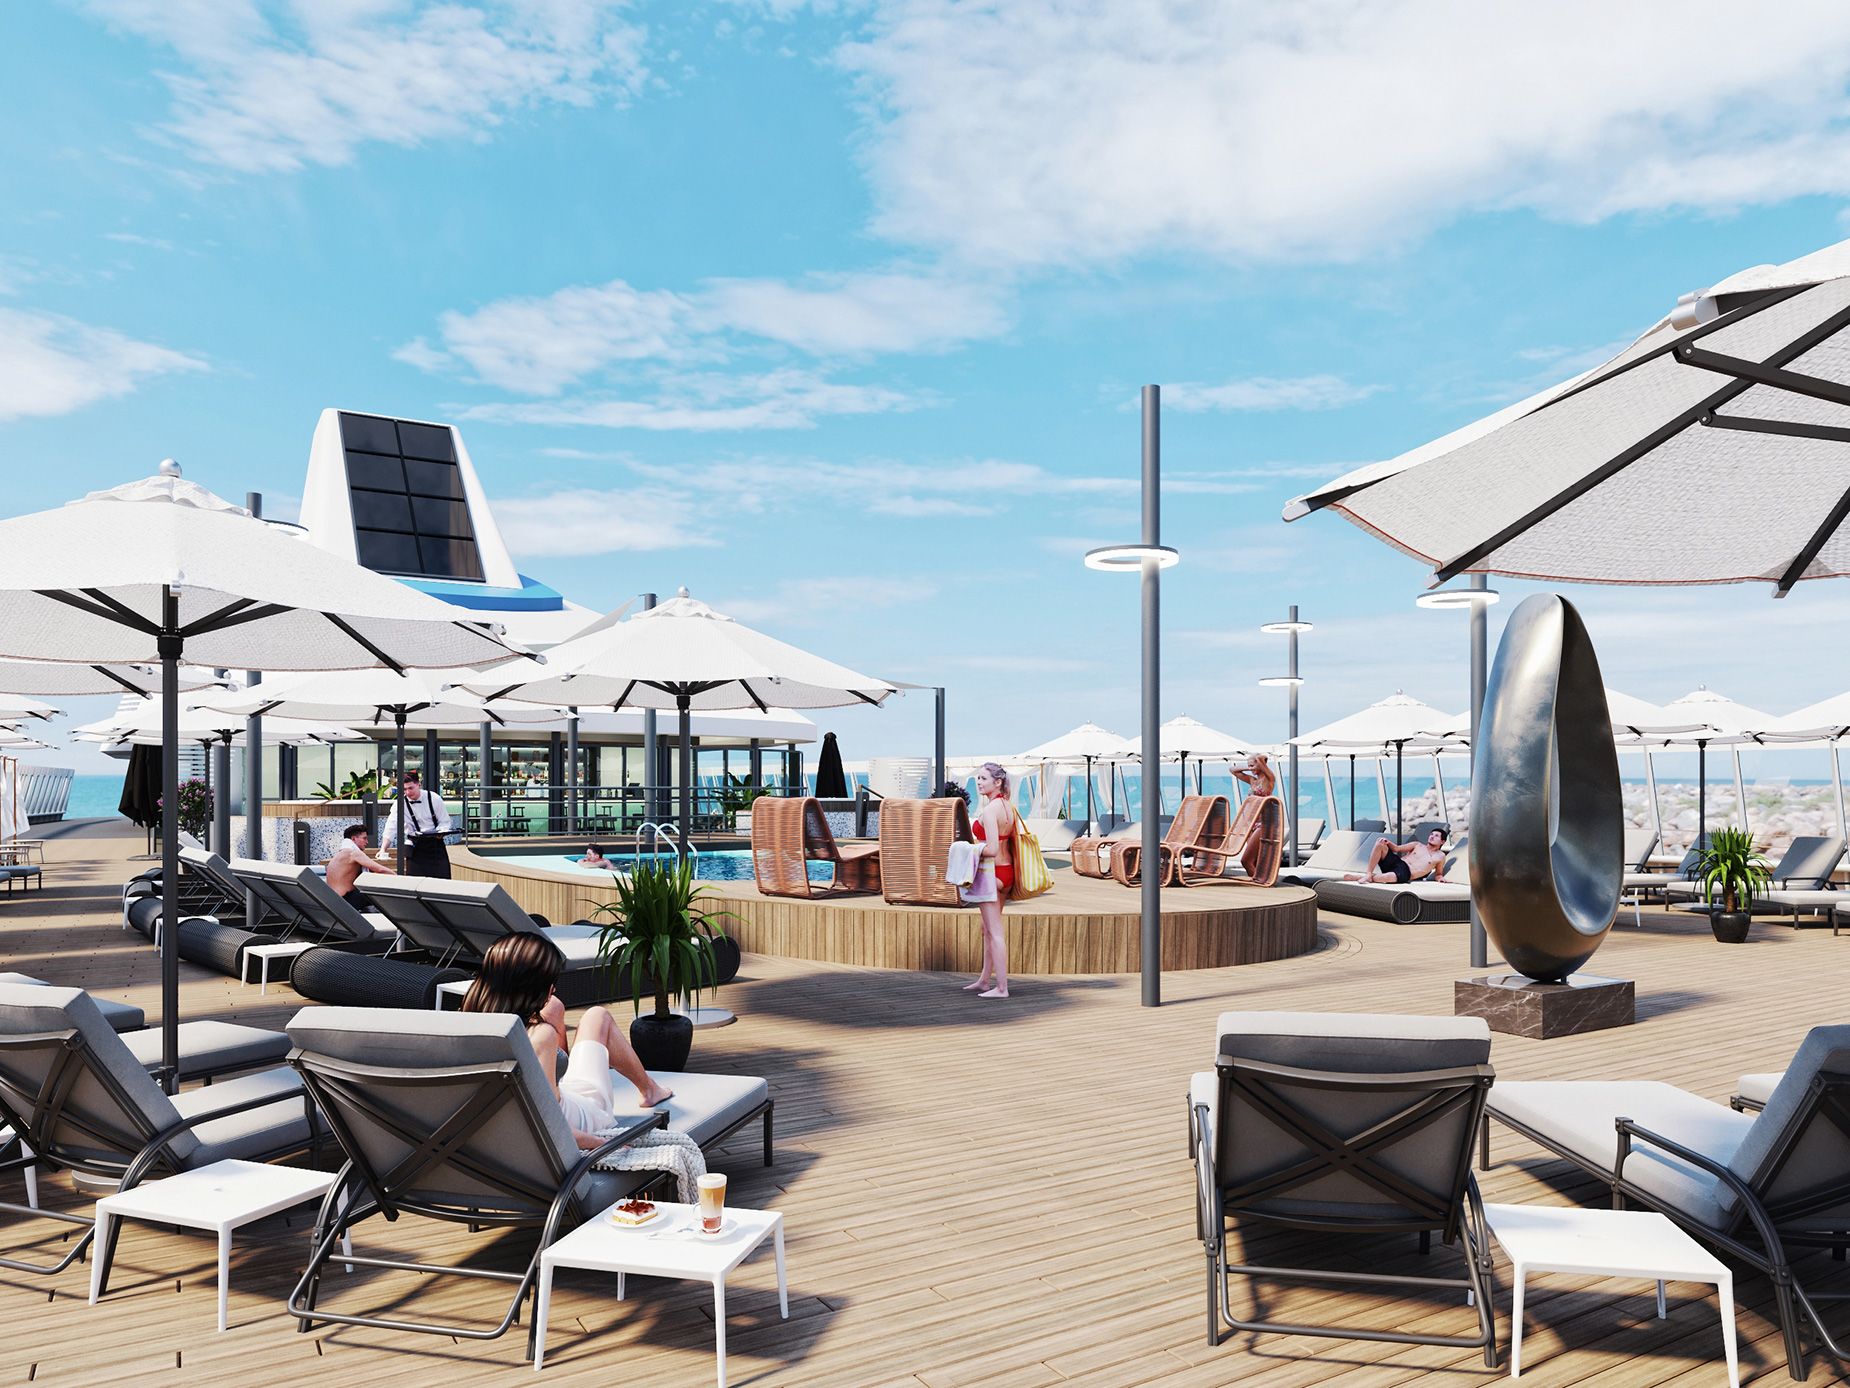 Renderings of the ship touted a dream lifestyle.